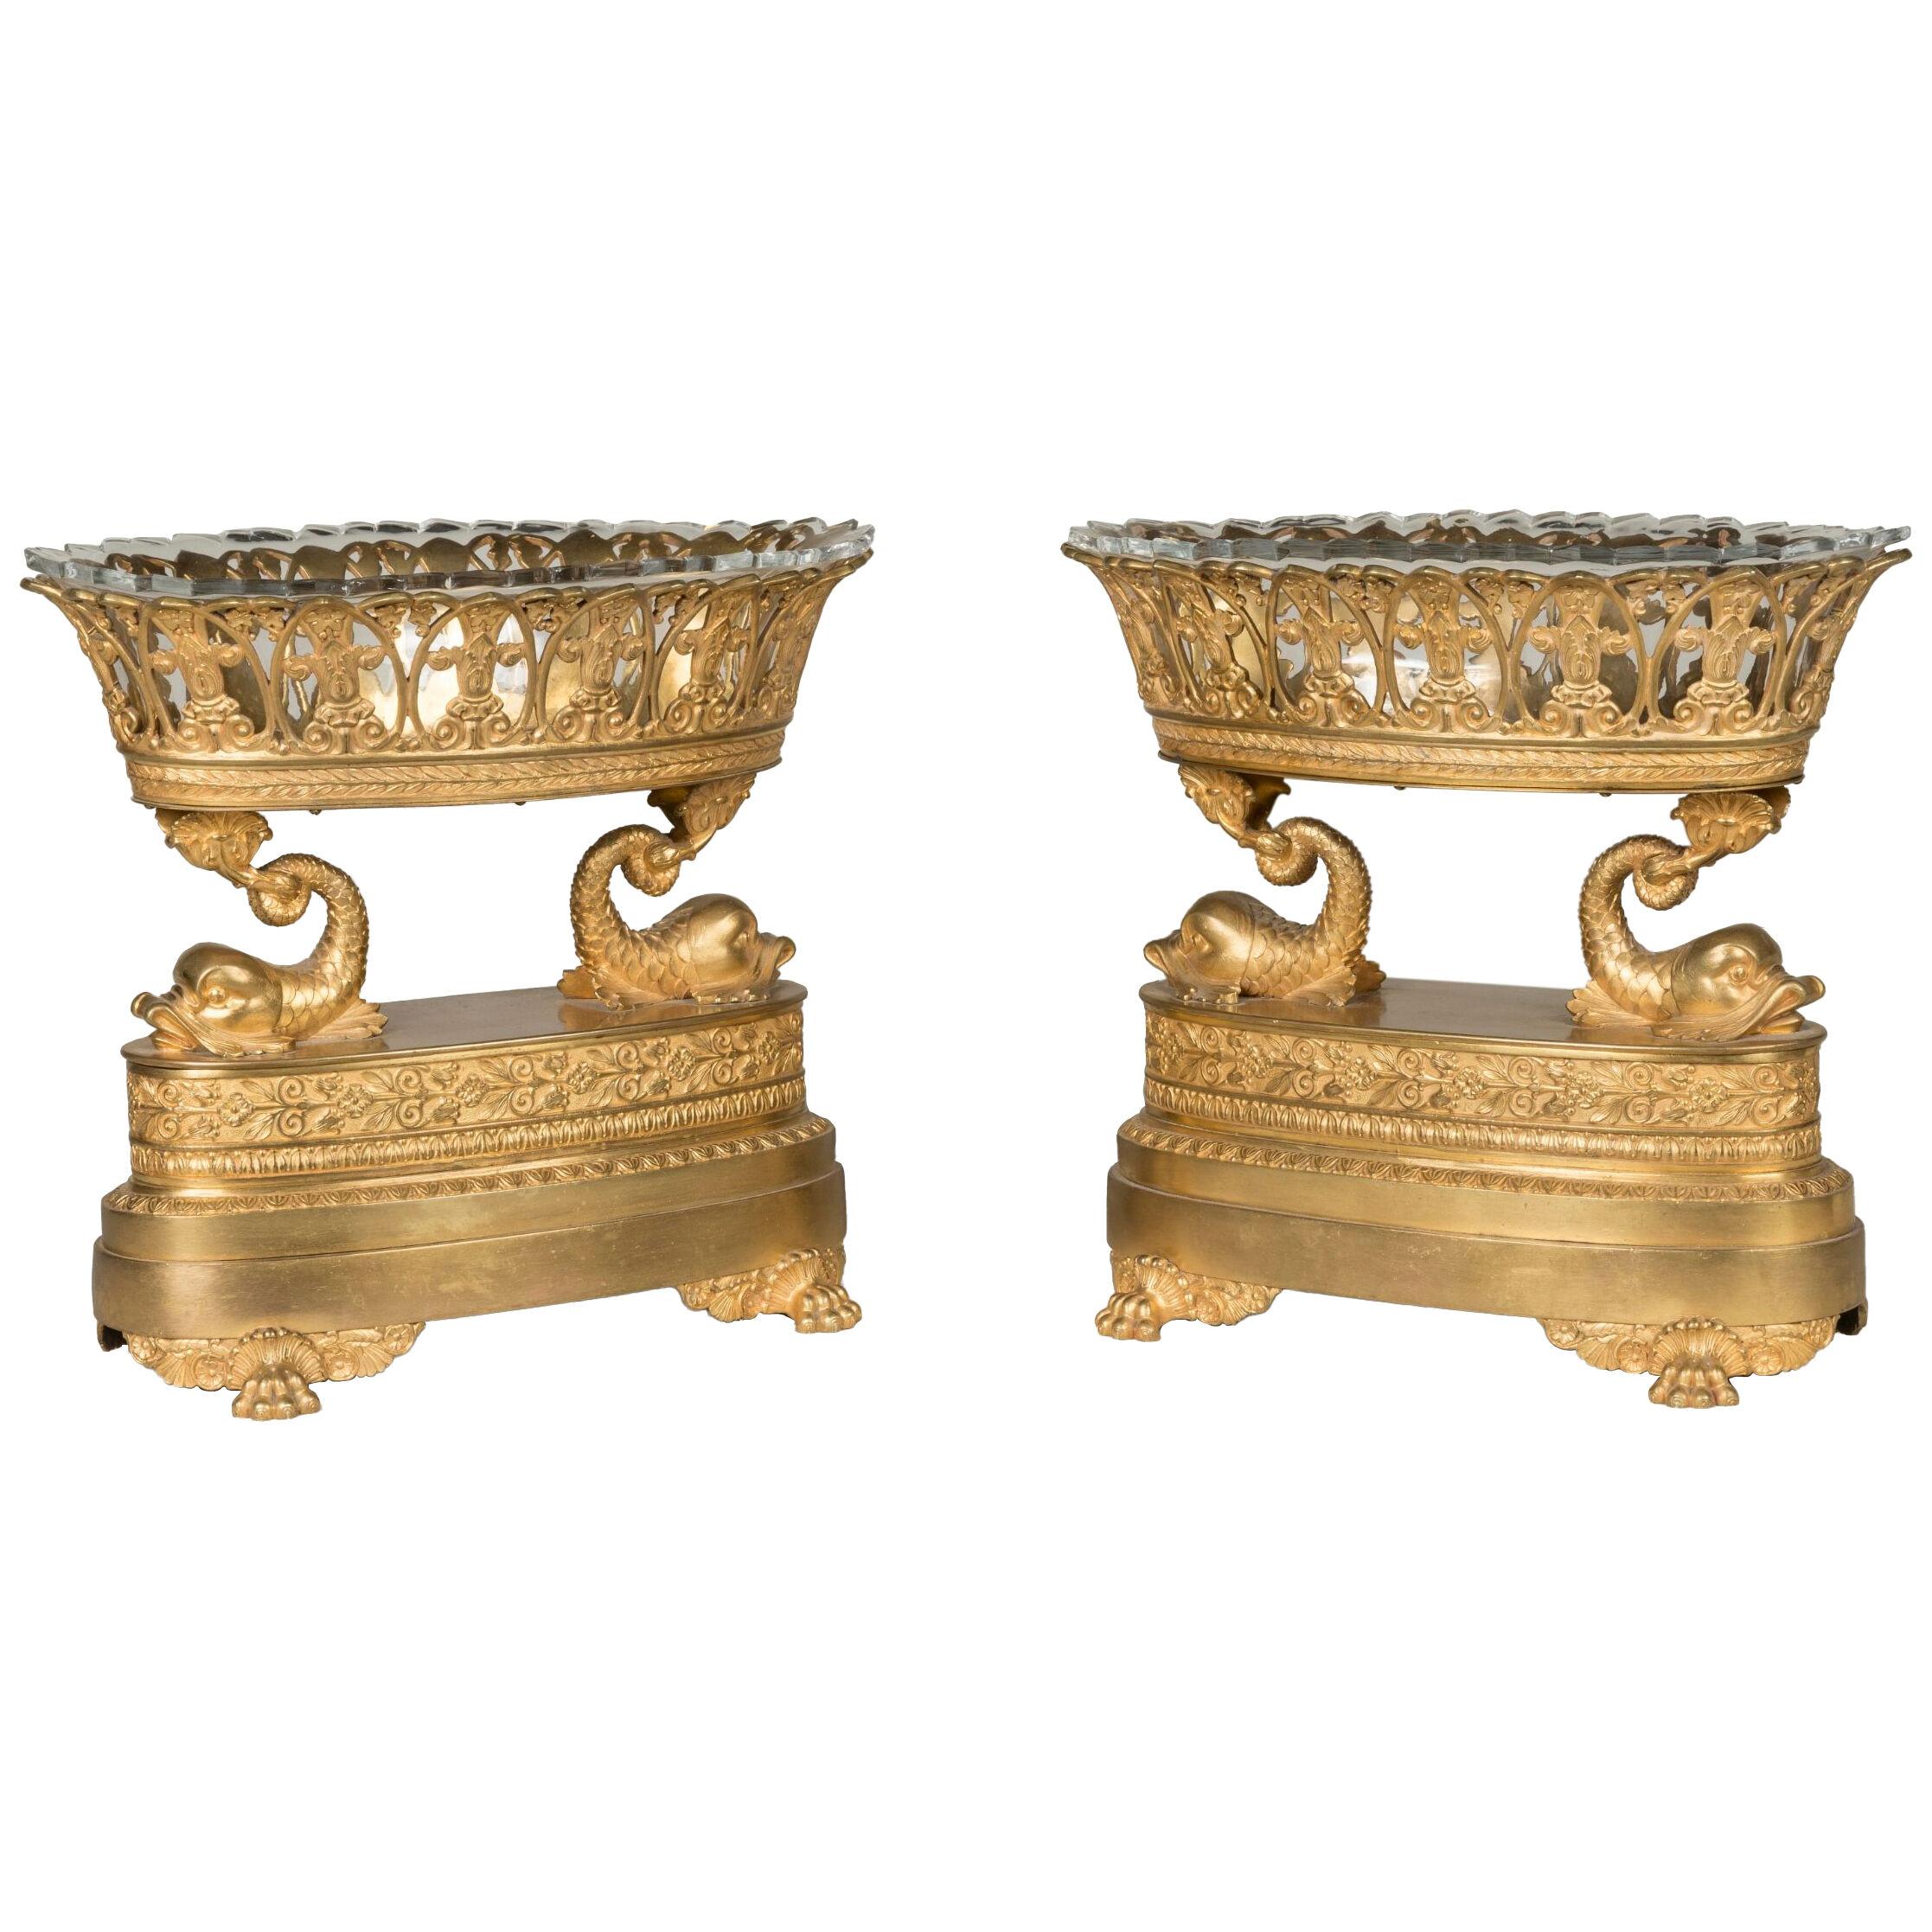 Pair of French Empire Period 'Dolphin' Centrepieces